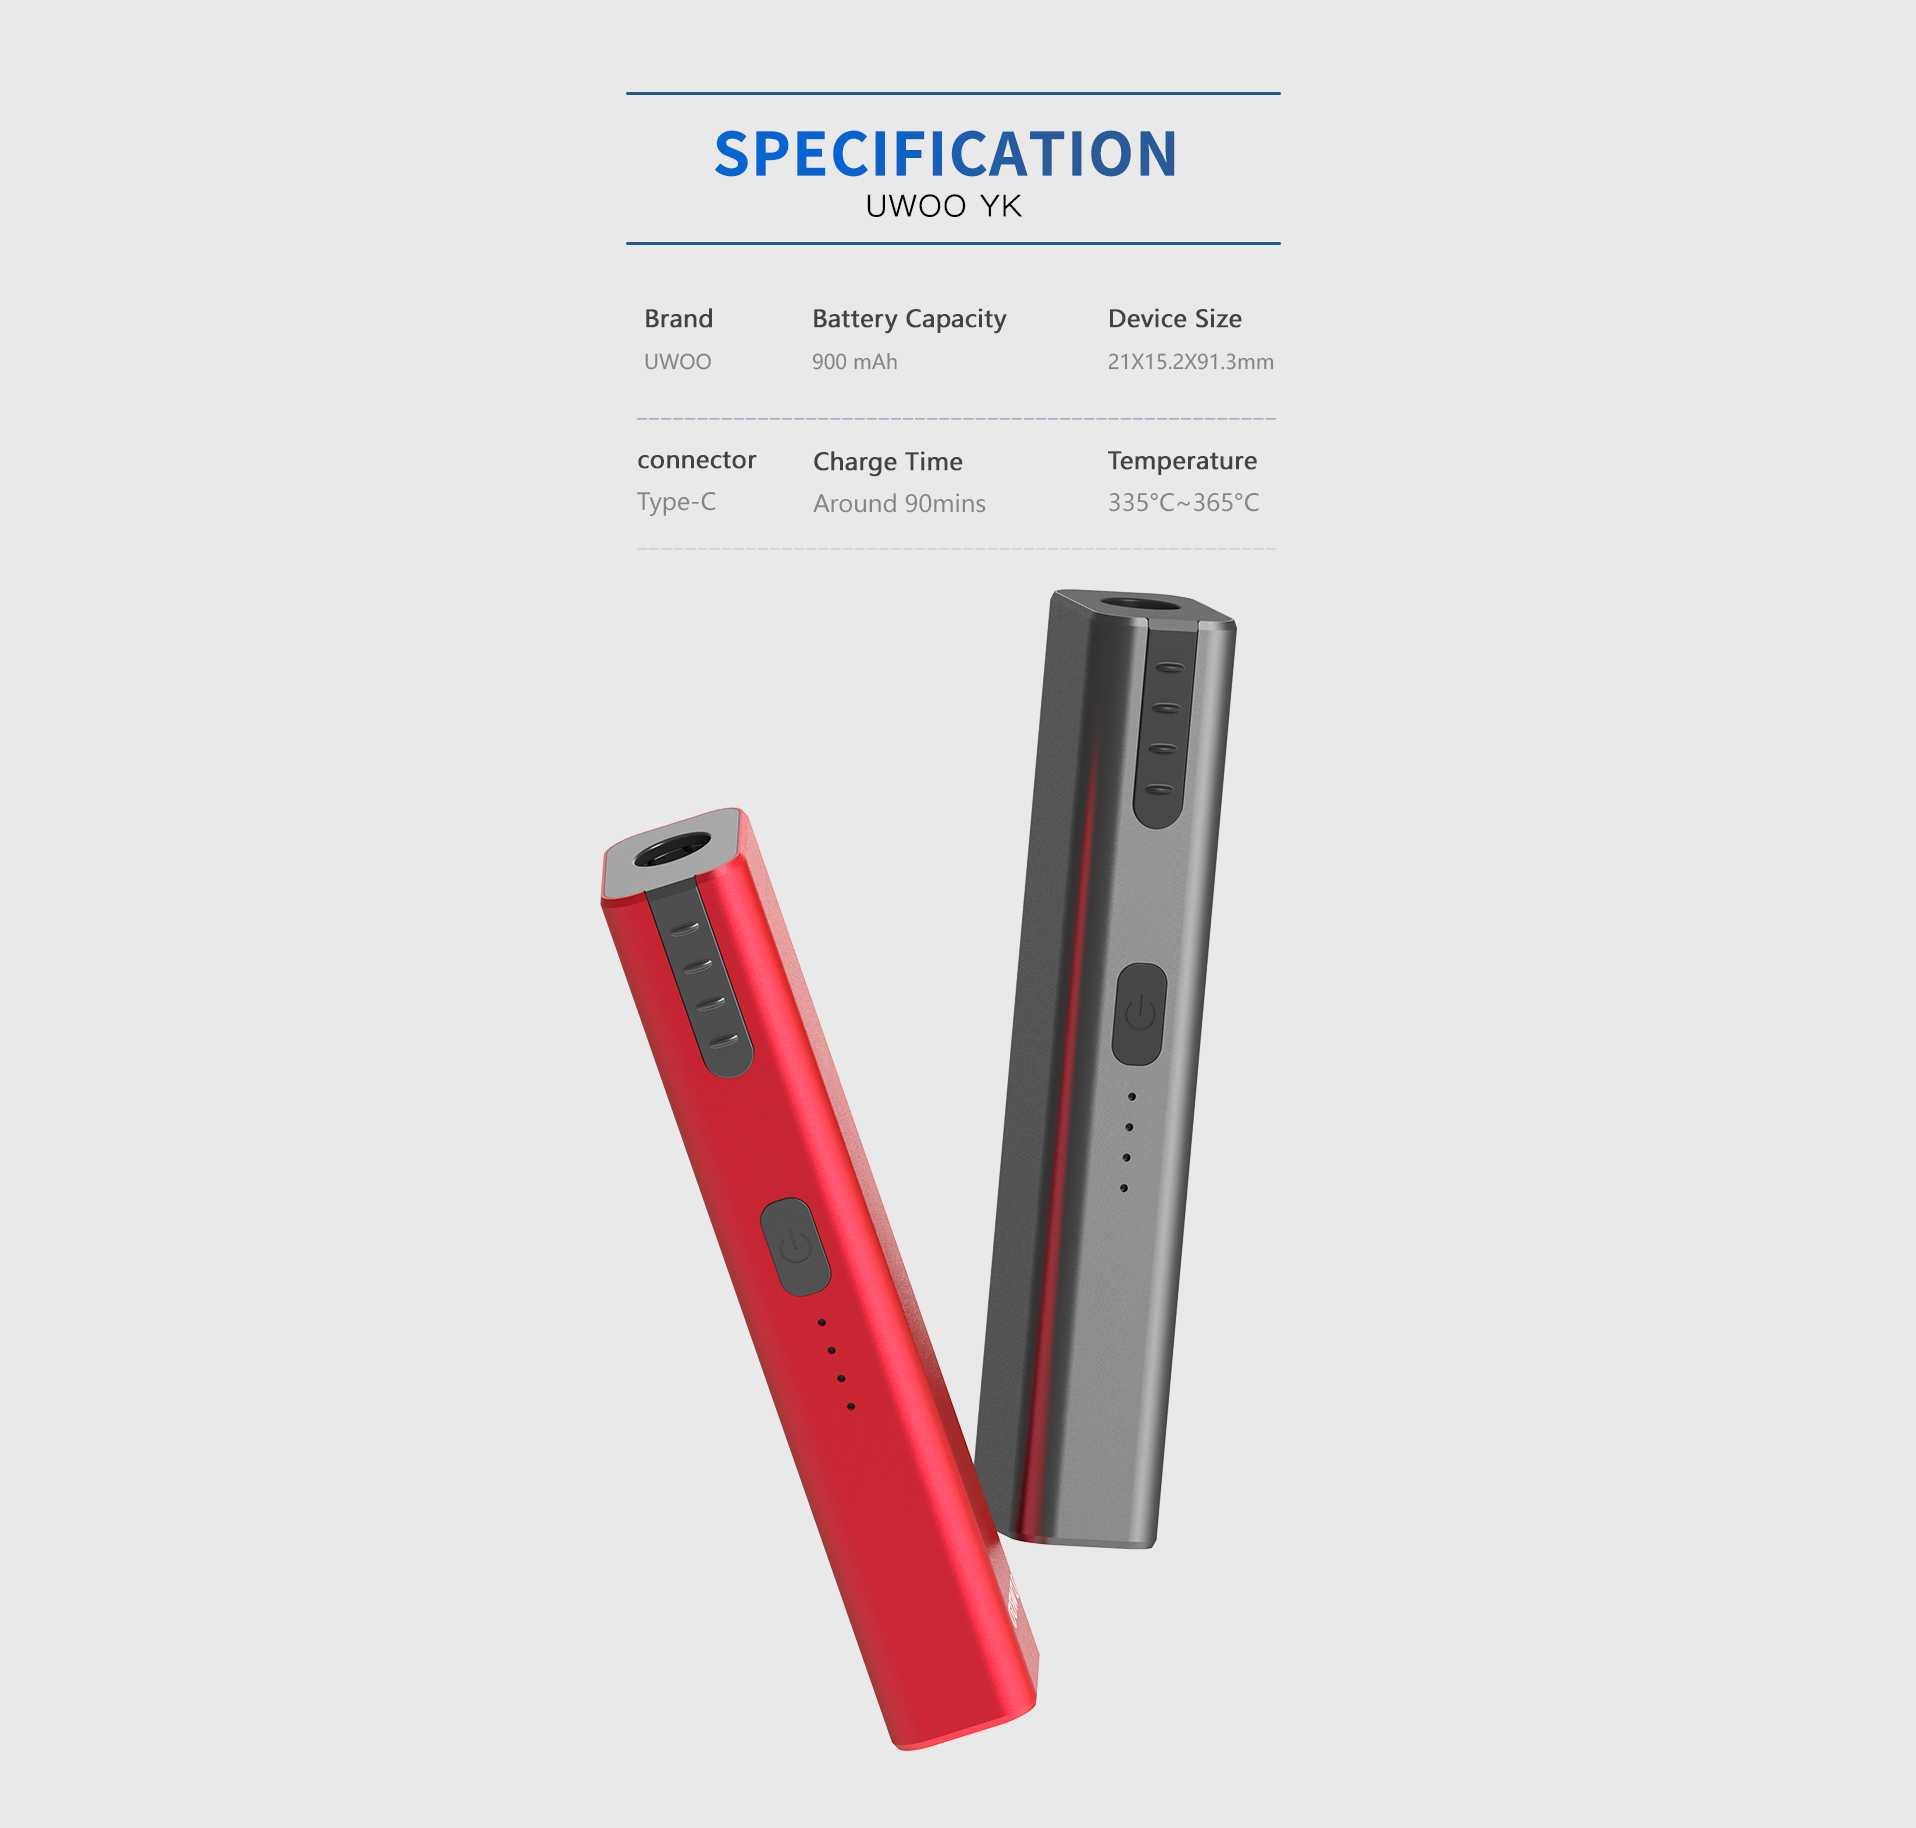 UWOO YK SPECIFICATION Brand: UW0O Battery Capacity: 900 mAh Device Size: 21X15.2X91.3mm connectorType-C Charge Time: Around 90mins Temperature: 335°C ~ 365°C